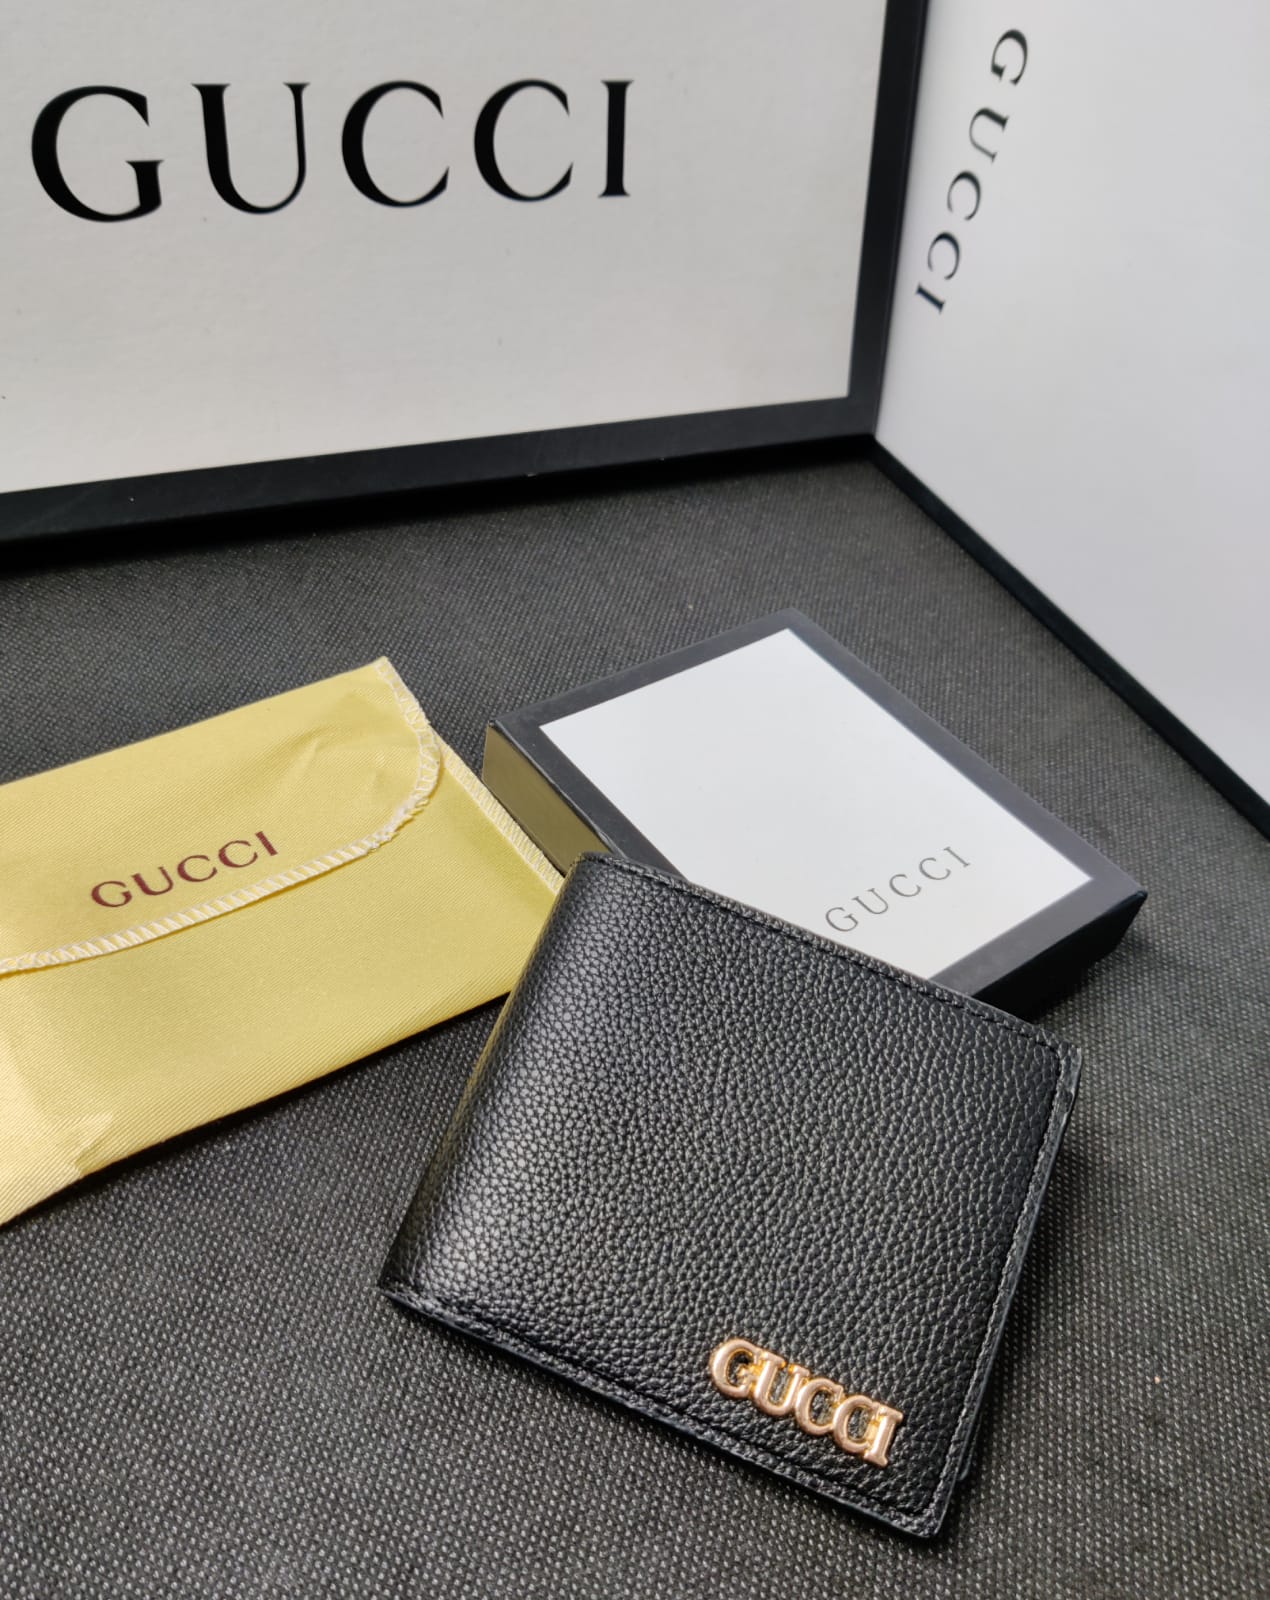 Gucci Leather Heavy Quality Full Black Plain wallet with Golden Logo Wallet For Man GU-704